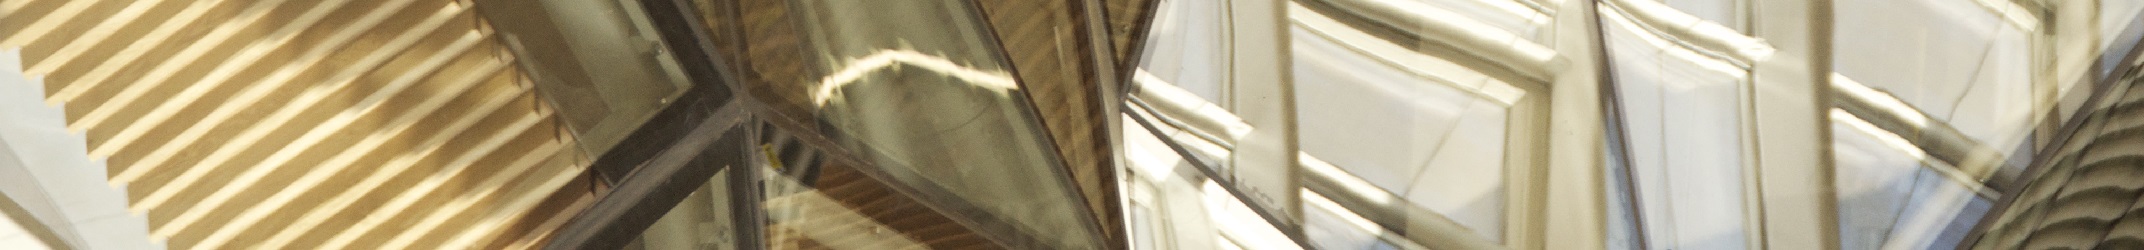 A reflection of some stairs in an artistic skylight at the Andrew Wiles Building